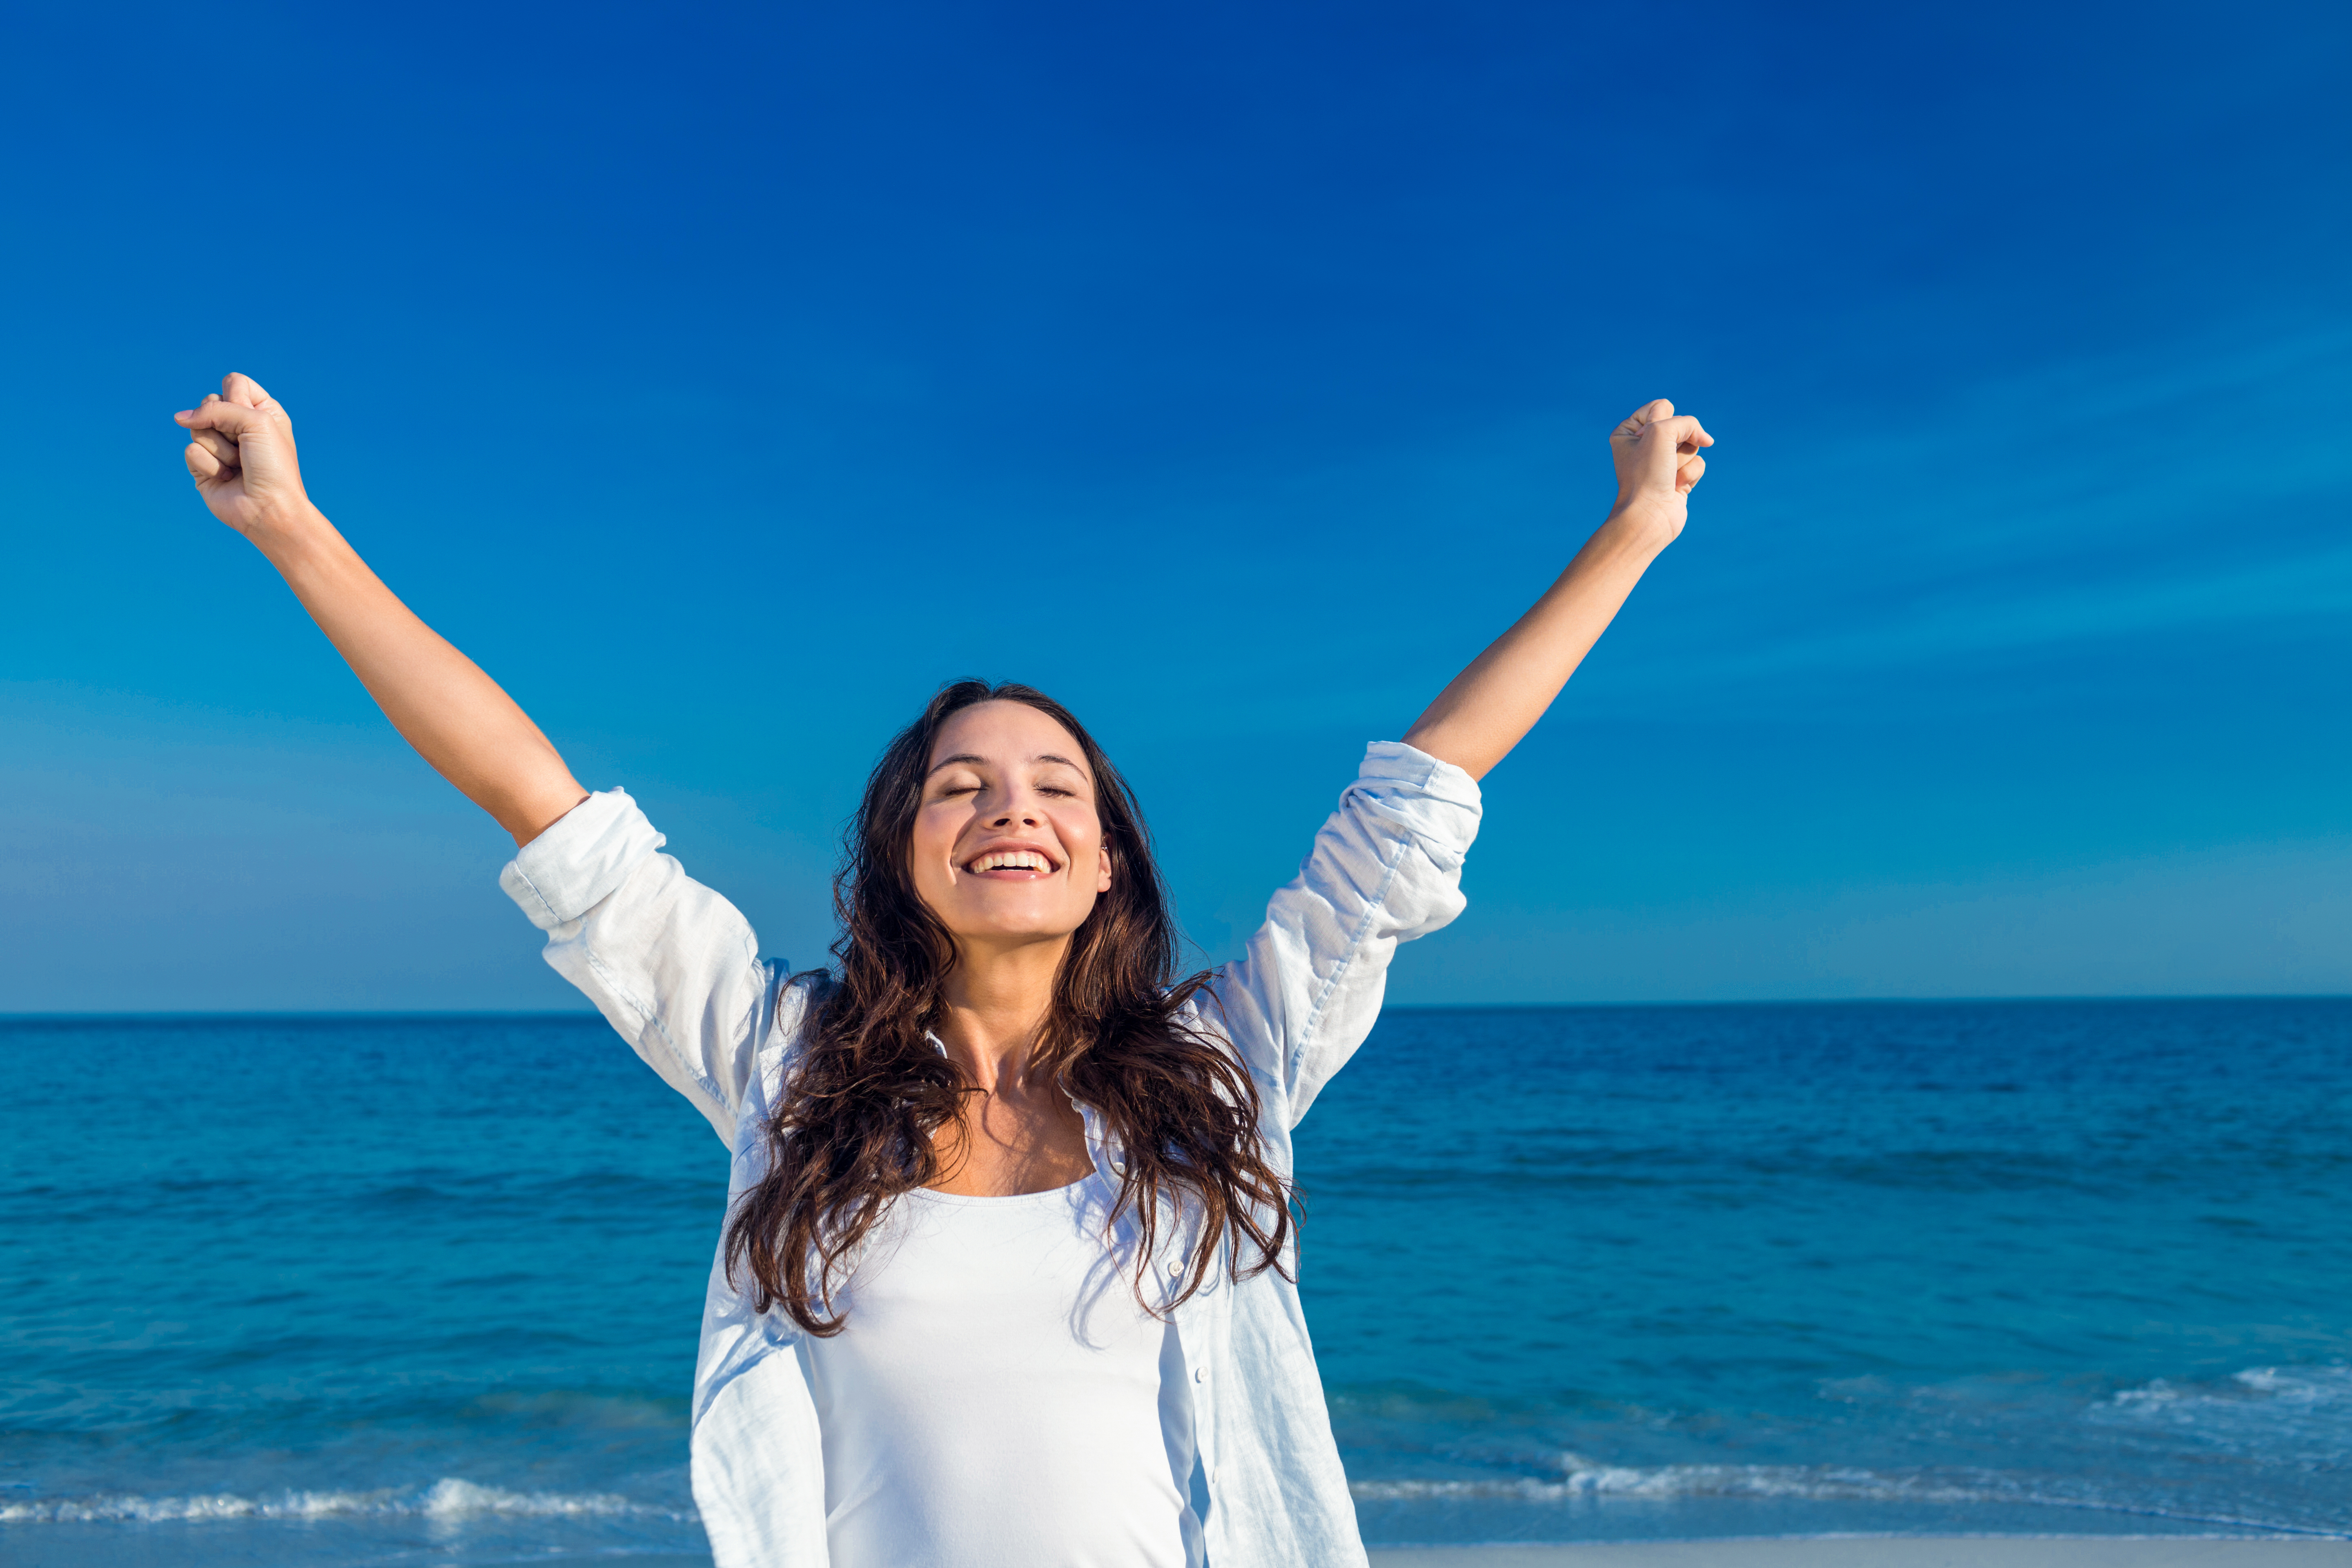 A woman smiling with her hands raised above her head on the beach | Source: Shutterstock